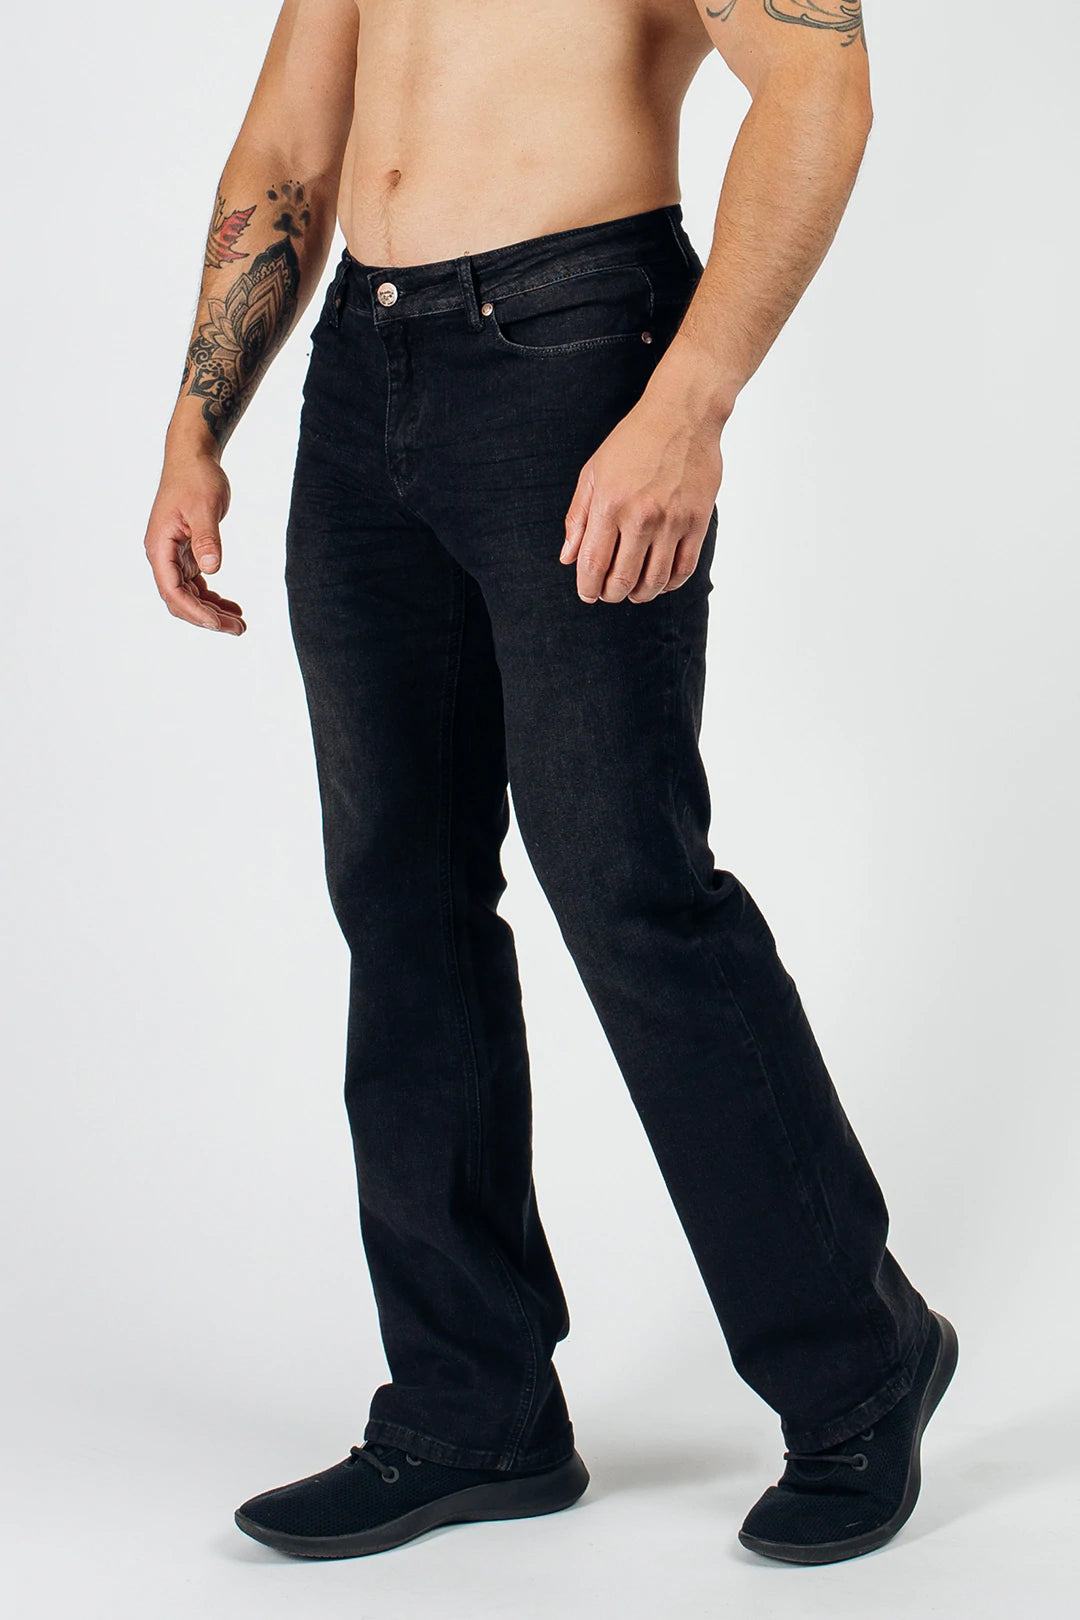 Boot Cut Athletic Fit  - Jet Black - photo from front second angle #color_jet-black